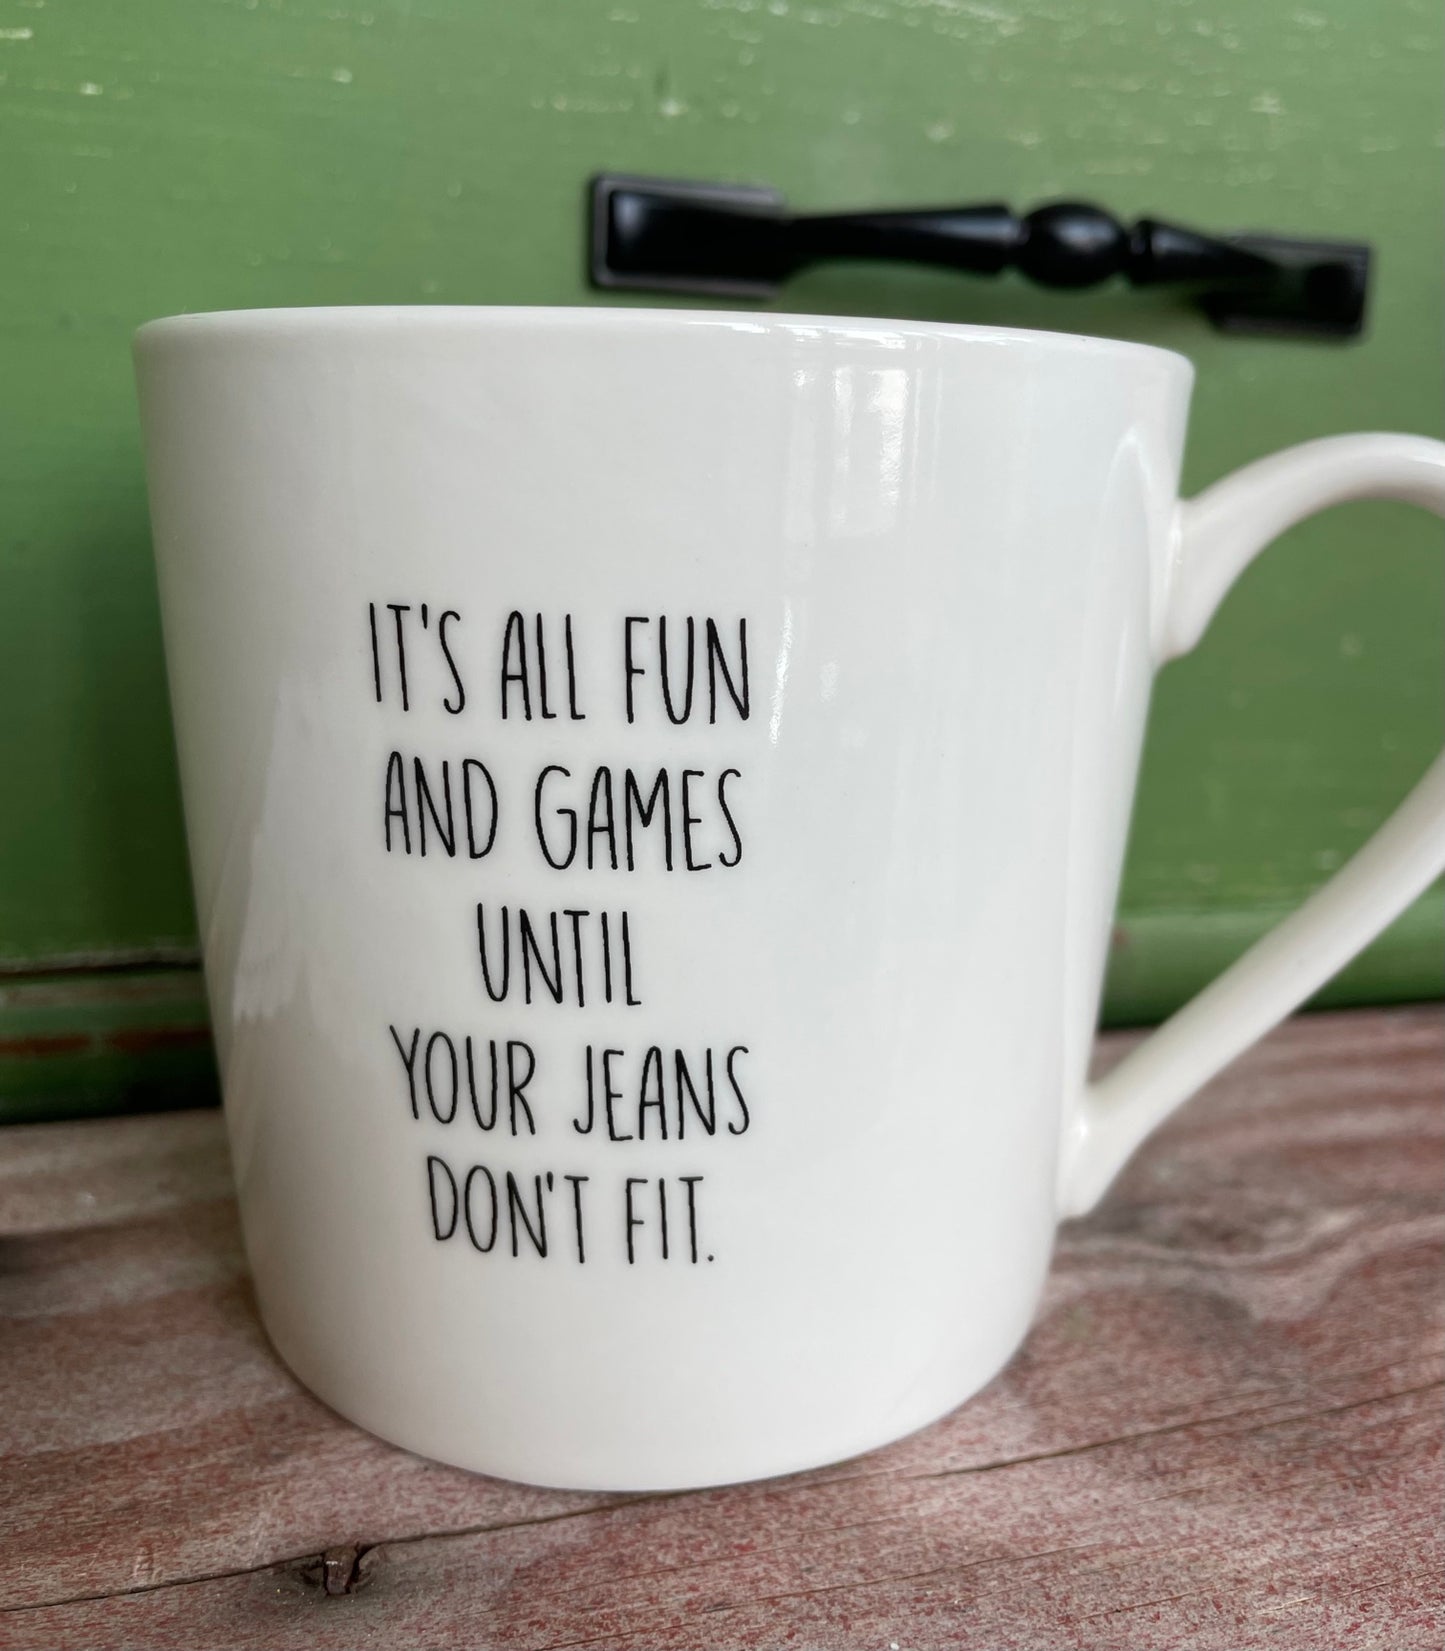 "It's all fun and games until your jeans don't fit" white coffee mug